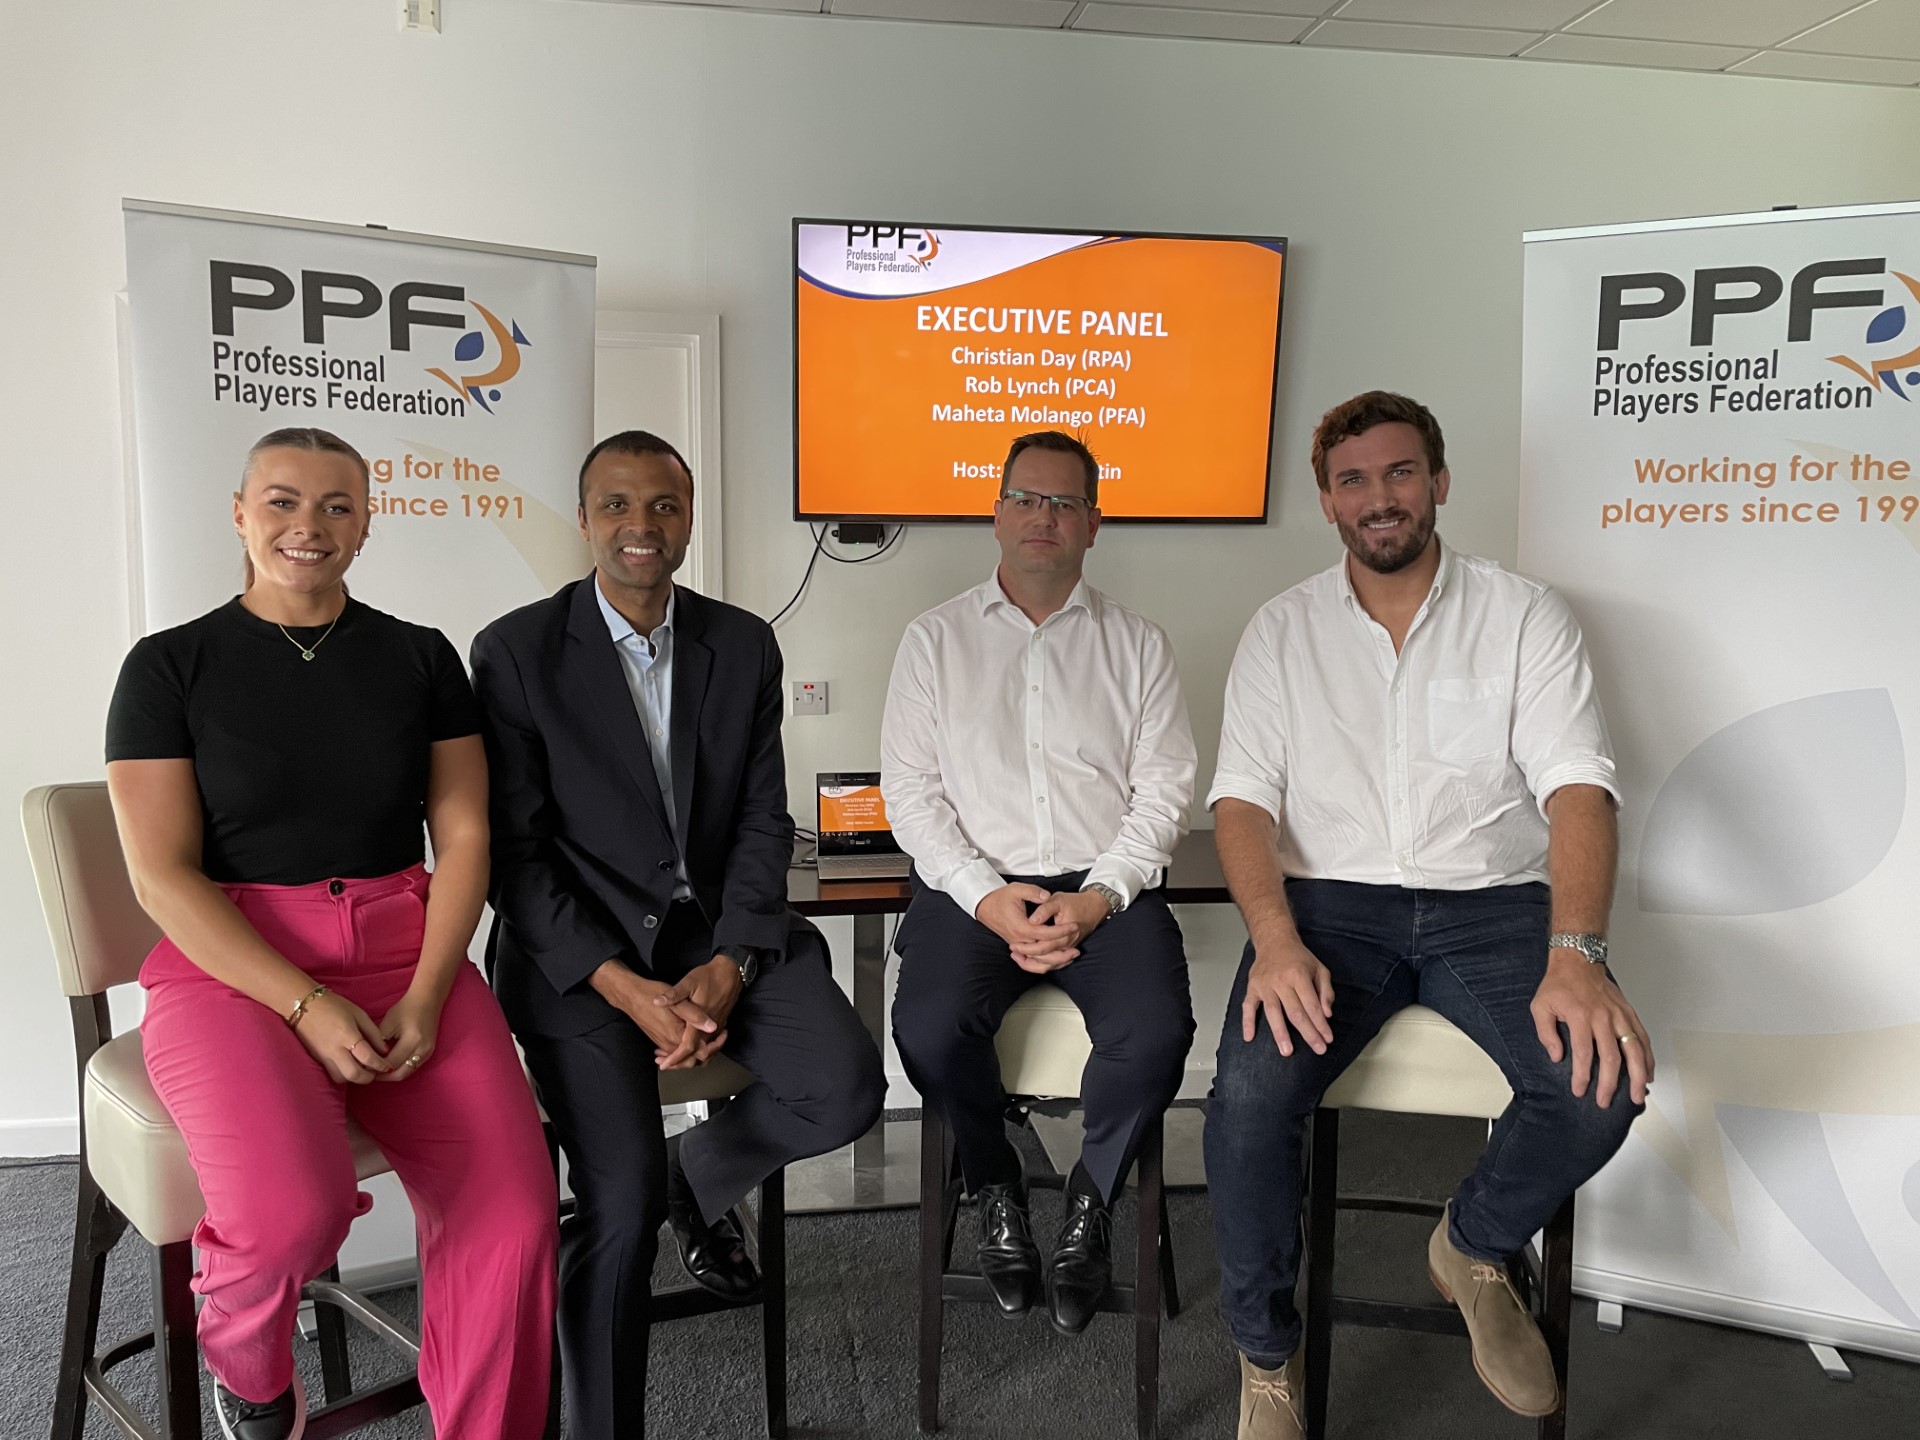 PPF - 6th July 2022 - Association Leaders stress importance of players in key decisions